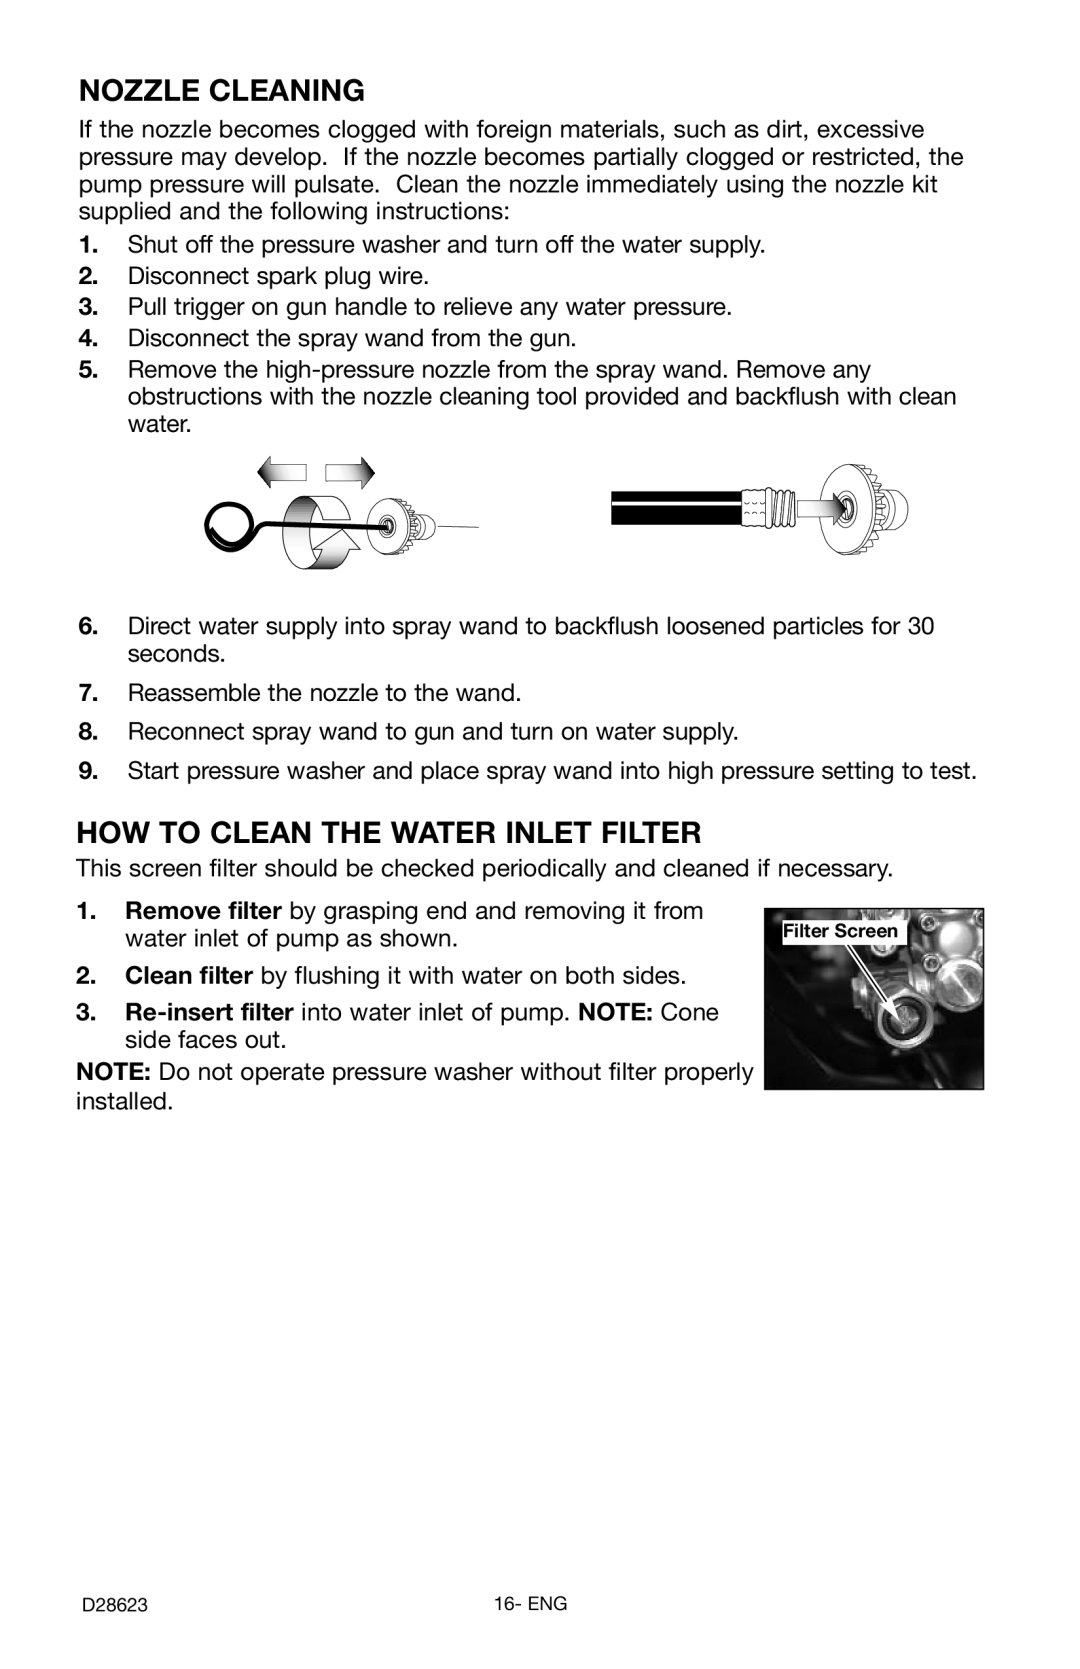 Delta D28623 instruction manual Nozzle Cleaning, How To Clean The Water Inlet Filter 